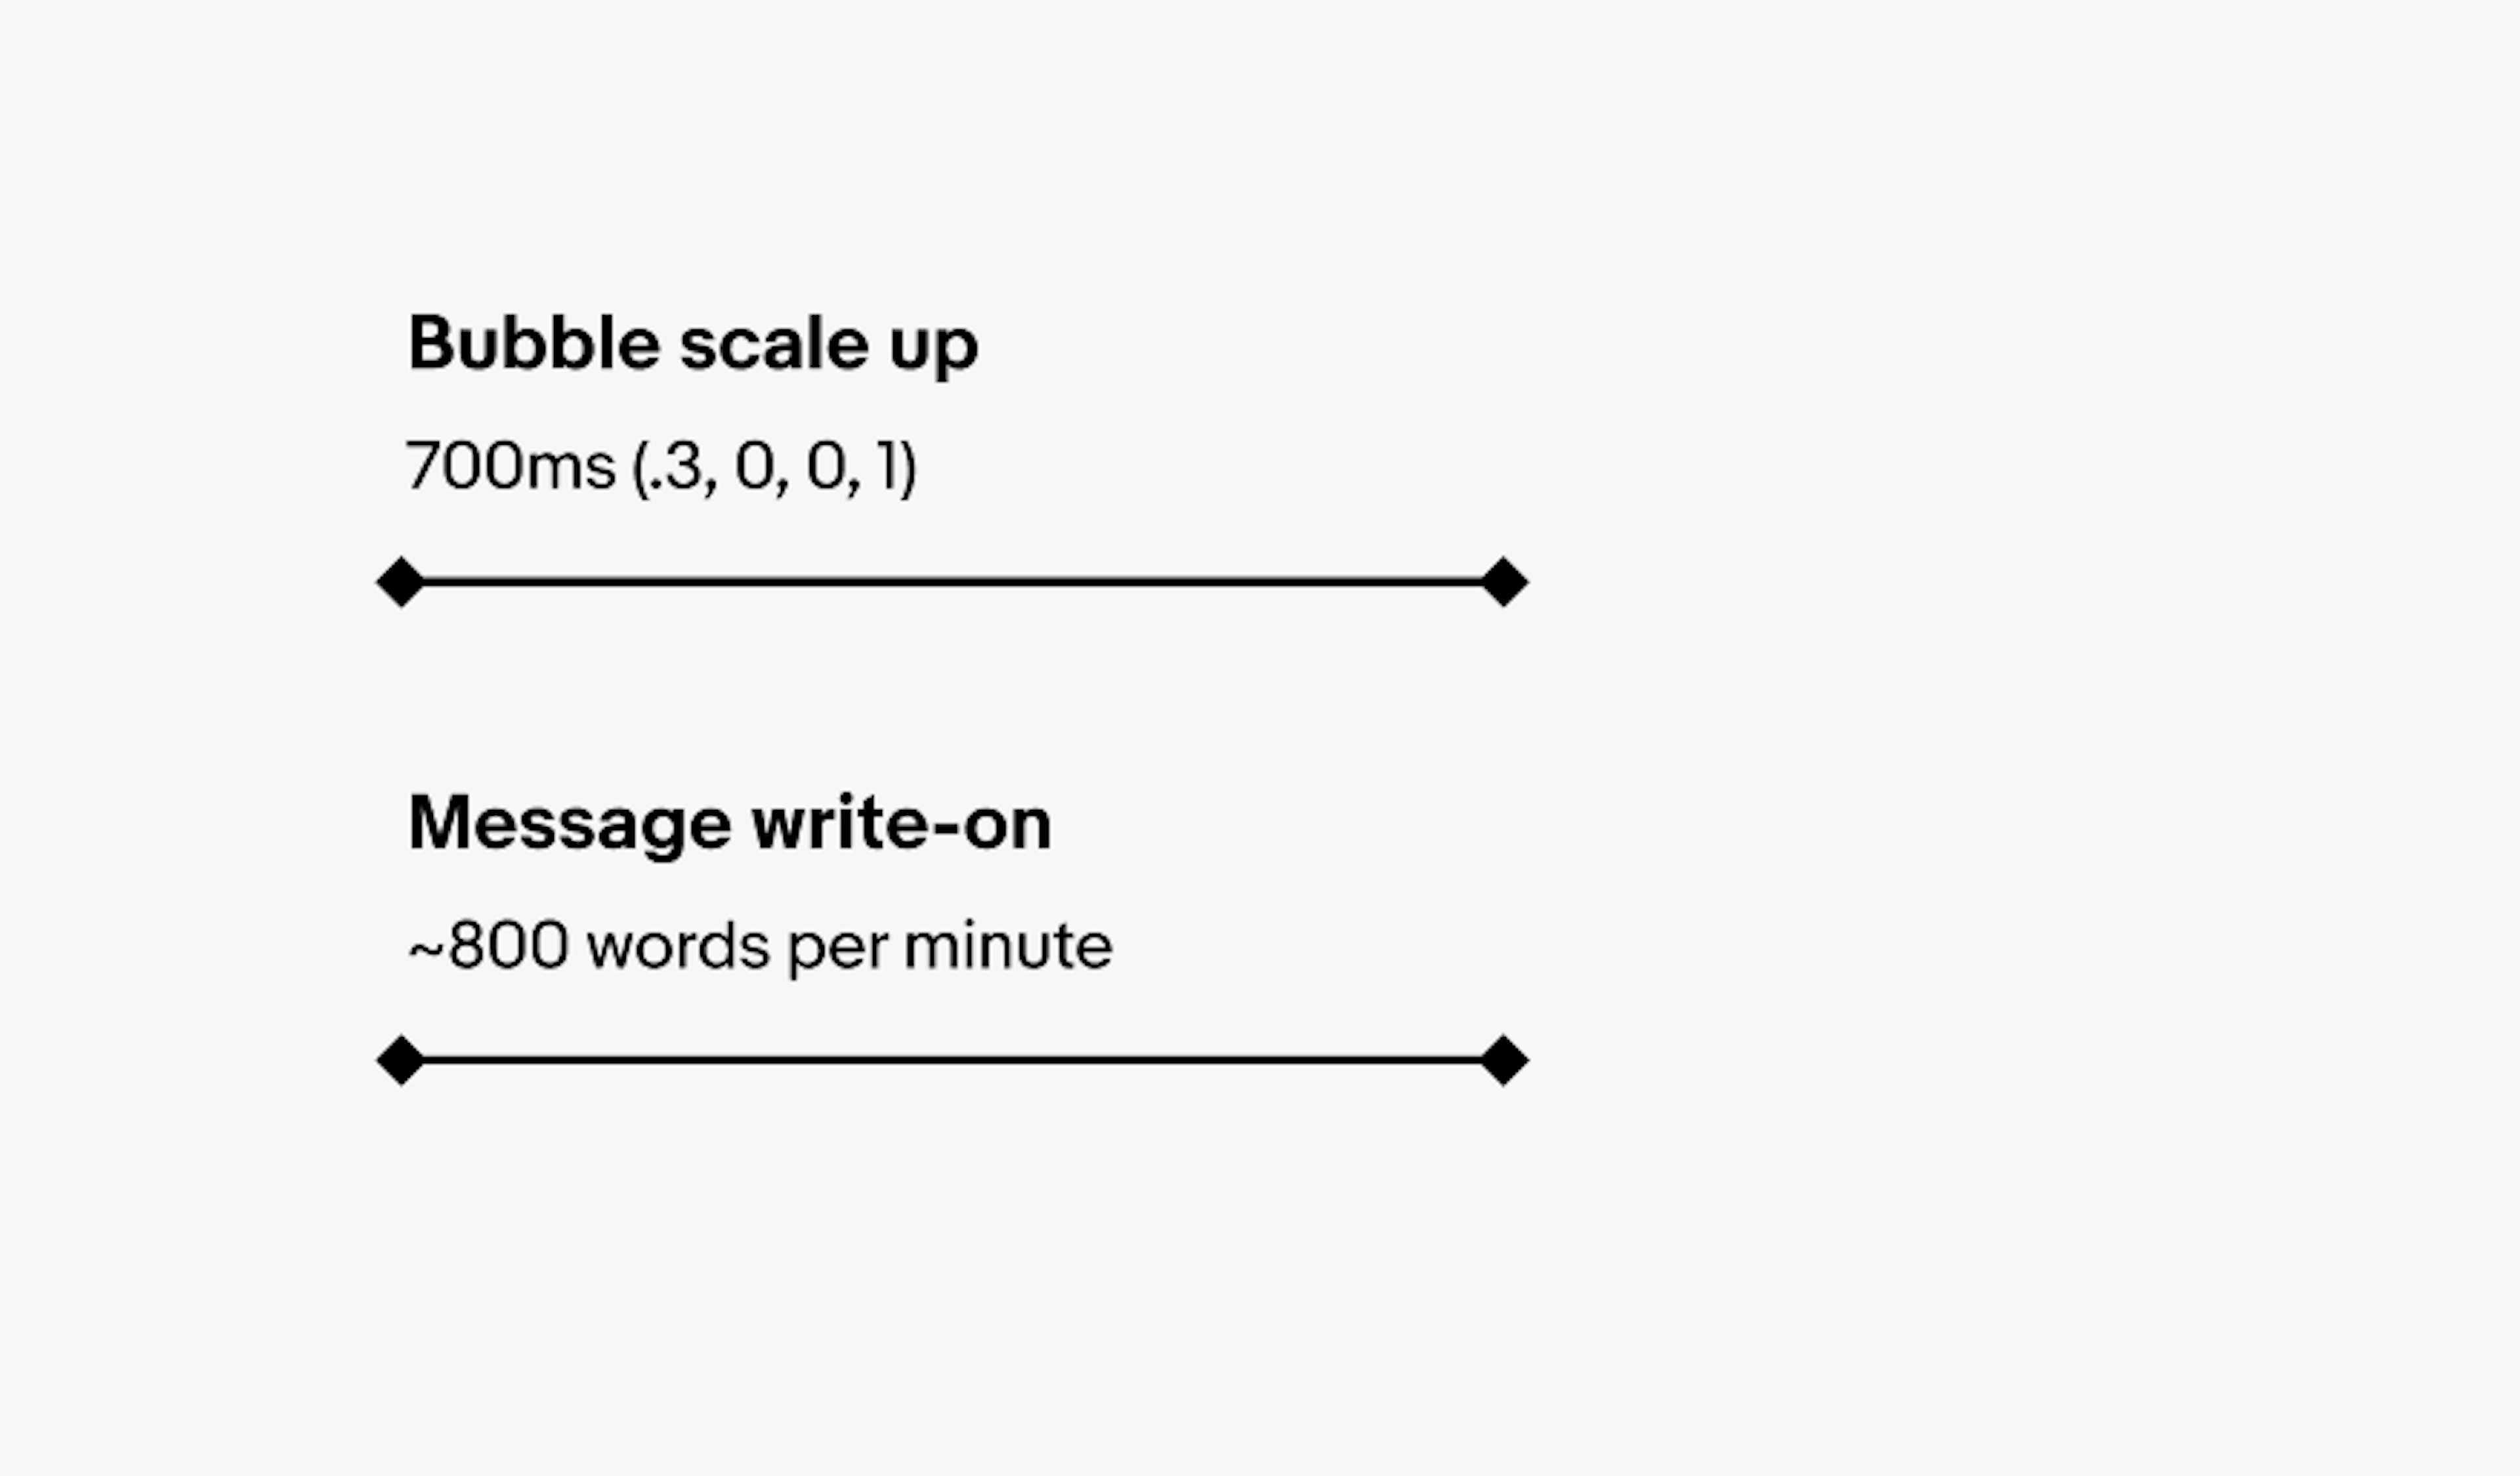 Two motion timeline graphics. The first is for bubble scale up 700ms (.3, 0, 0, 1). The second is for message write-on ~800 words per minute.